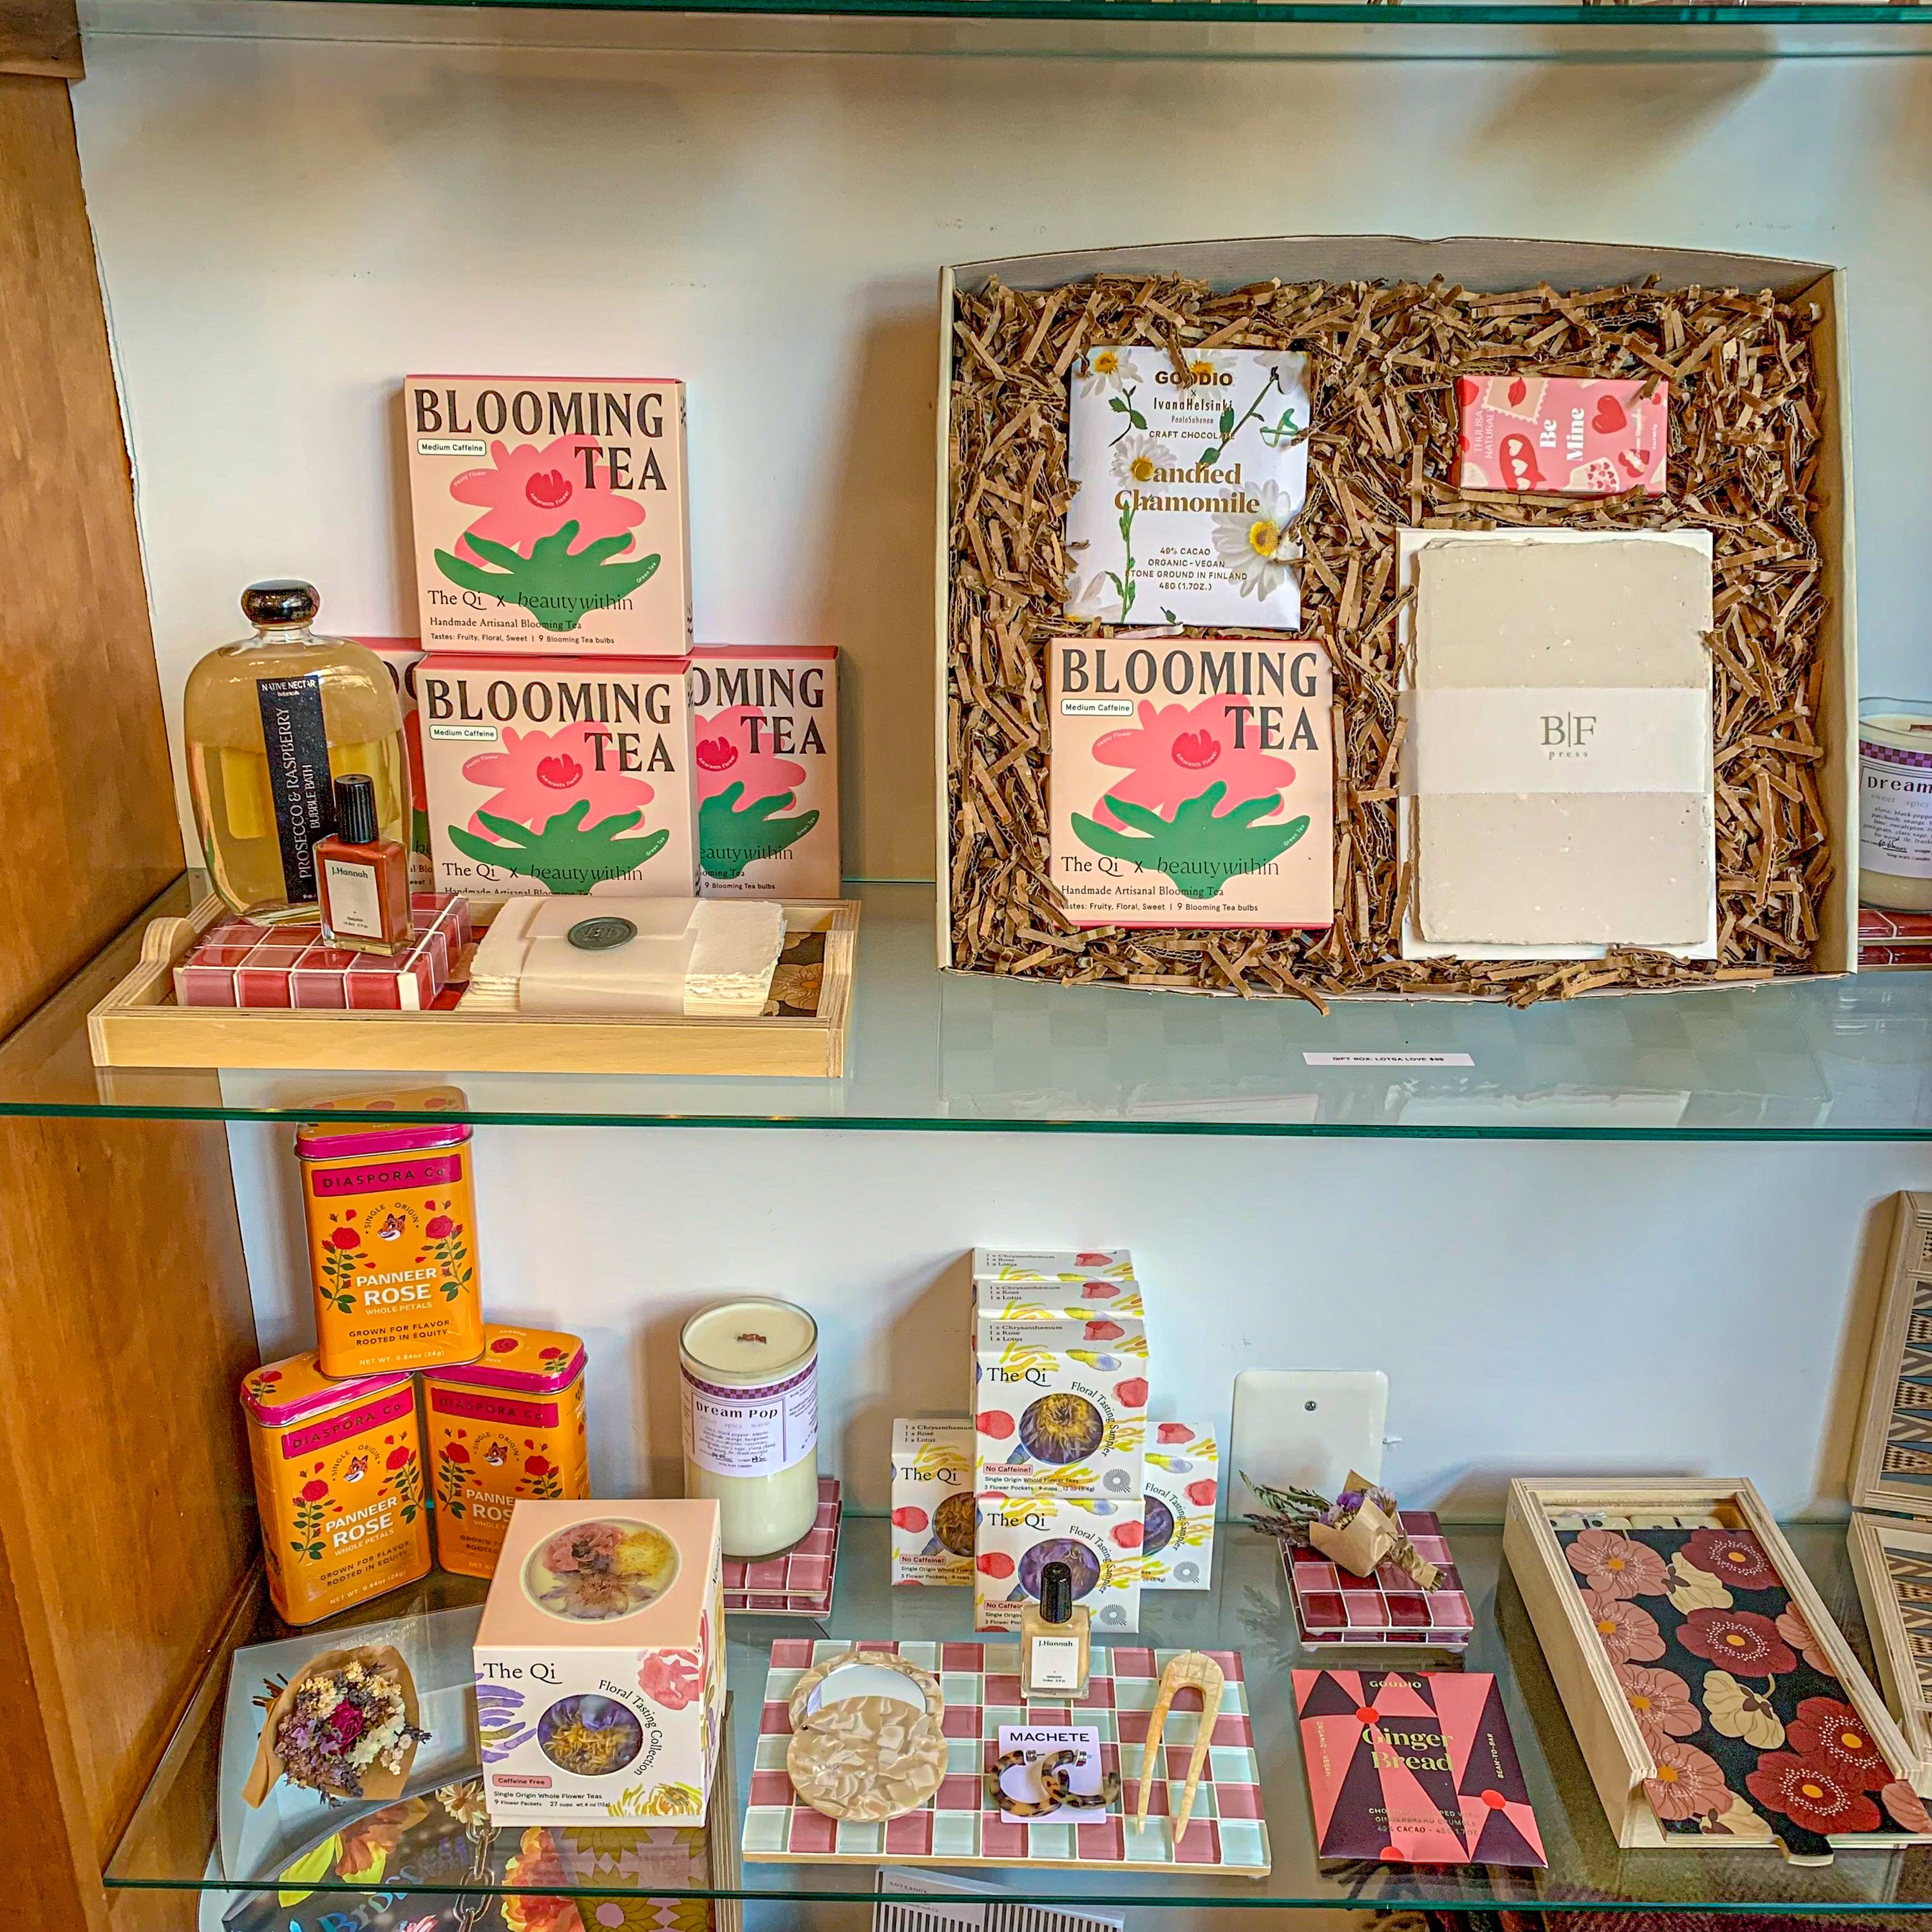 Green & Bean boutique valentines day shelf display with pink motif. Products include blooming tea set, pink & white checkered tile tray, floral domino set, Diaspora Co. Panneer roses, nail polish, and a curated gift box.